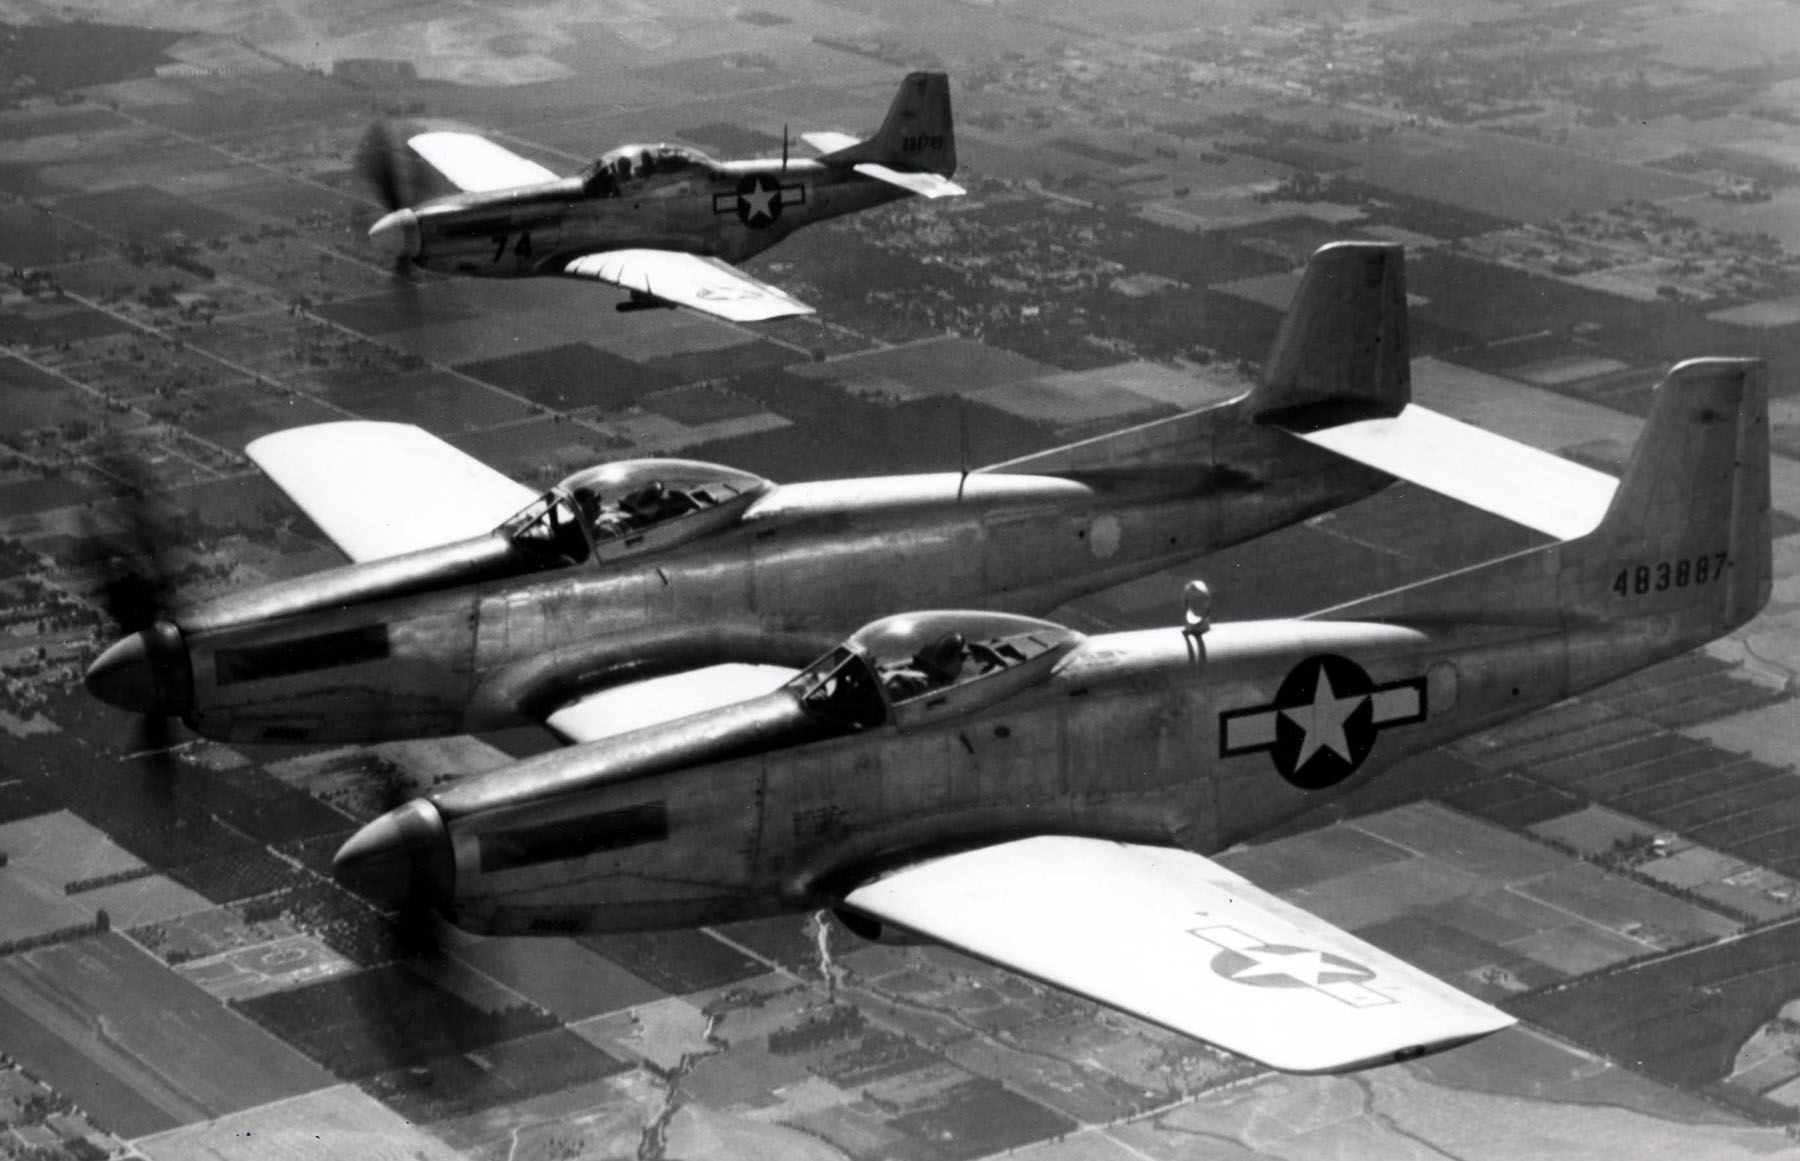 An F-82 and P-51 flying in formation over land.